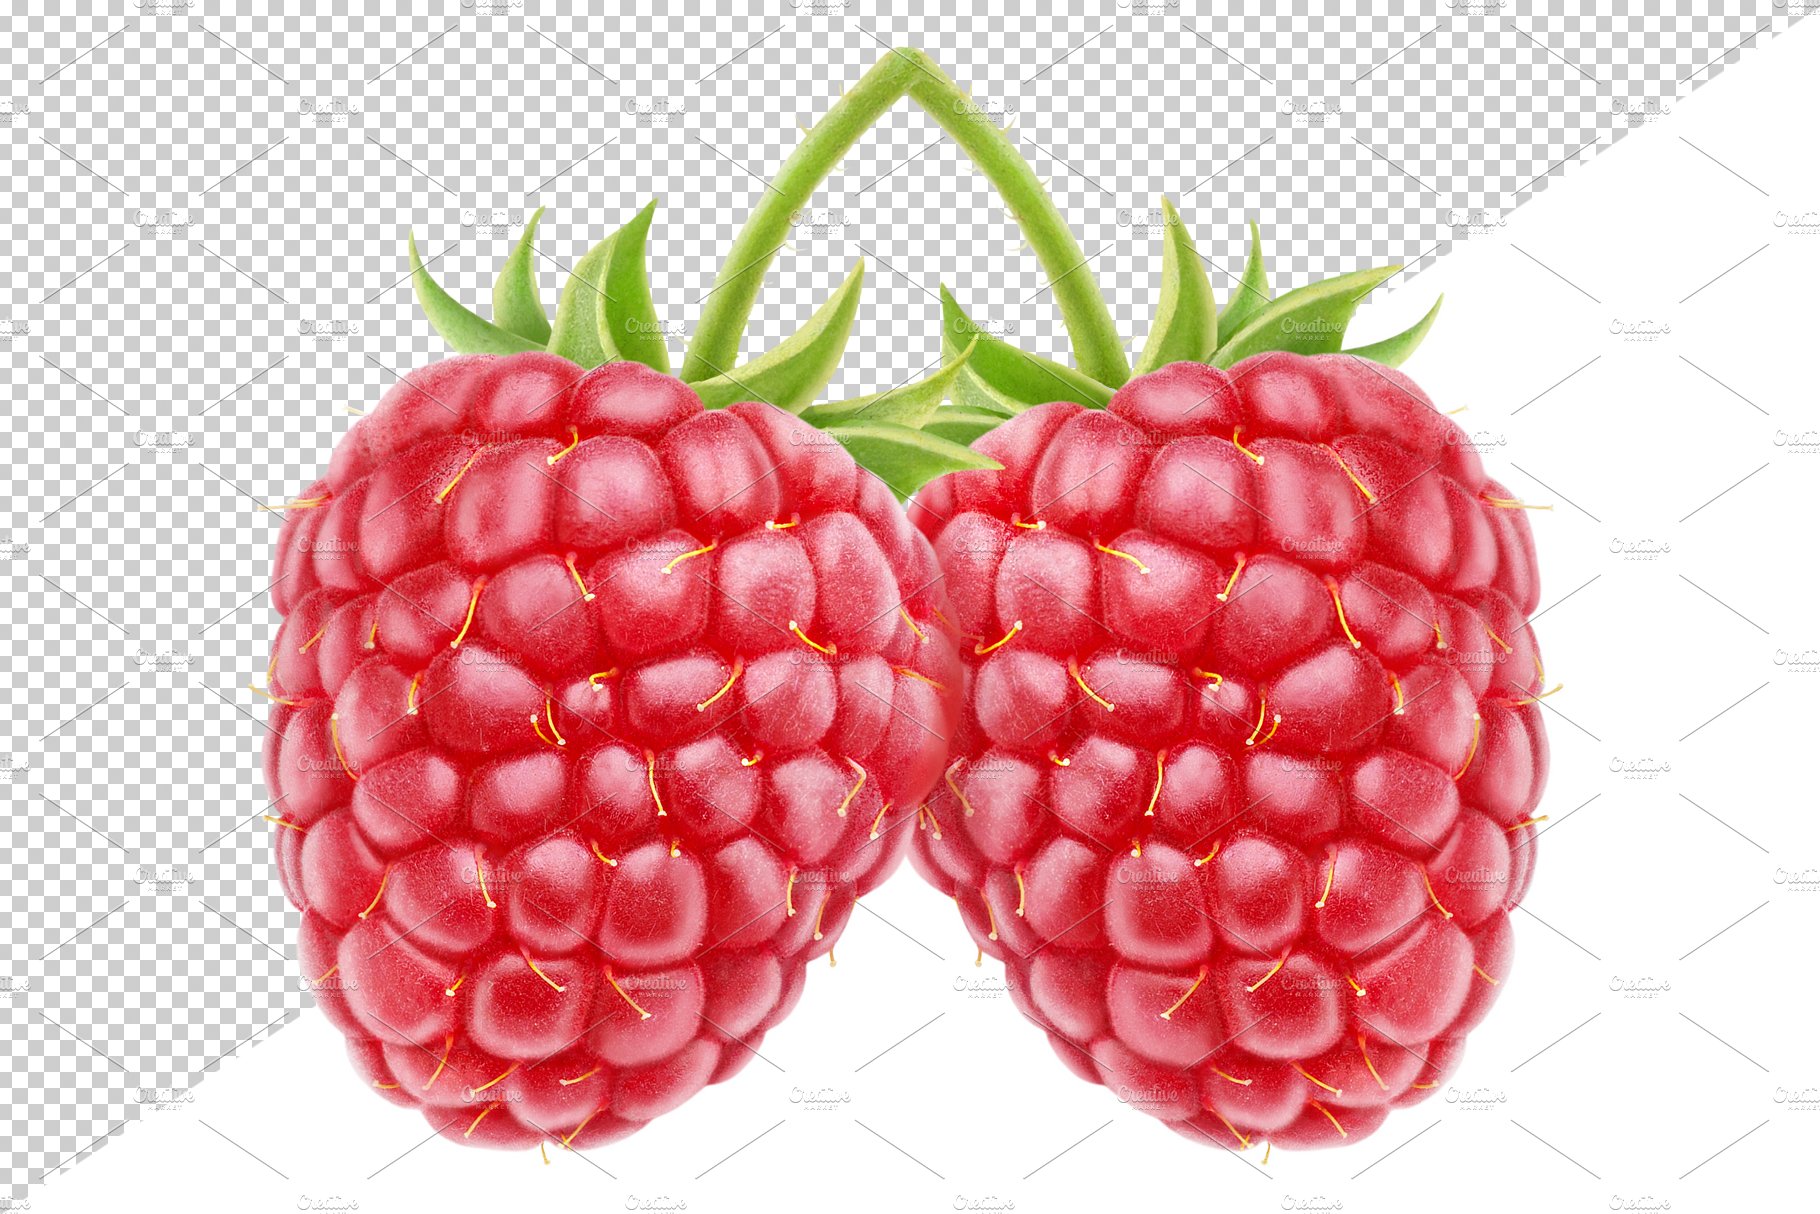 Pairs of raspberries preview image.